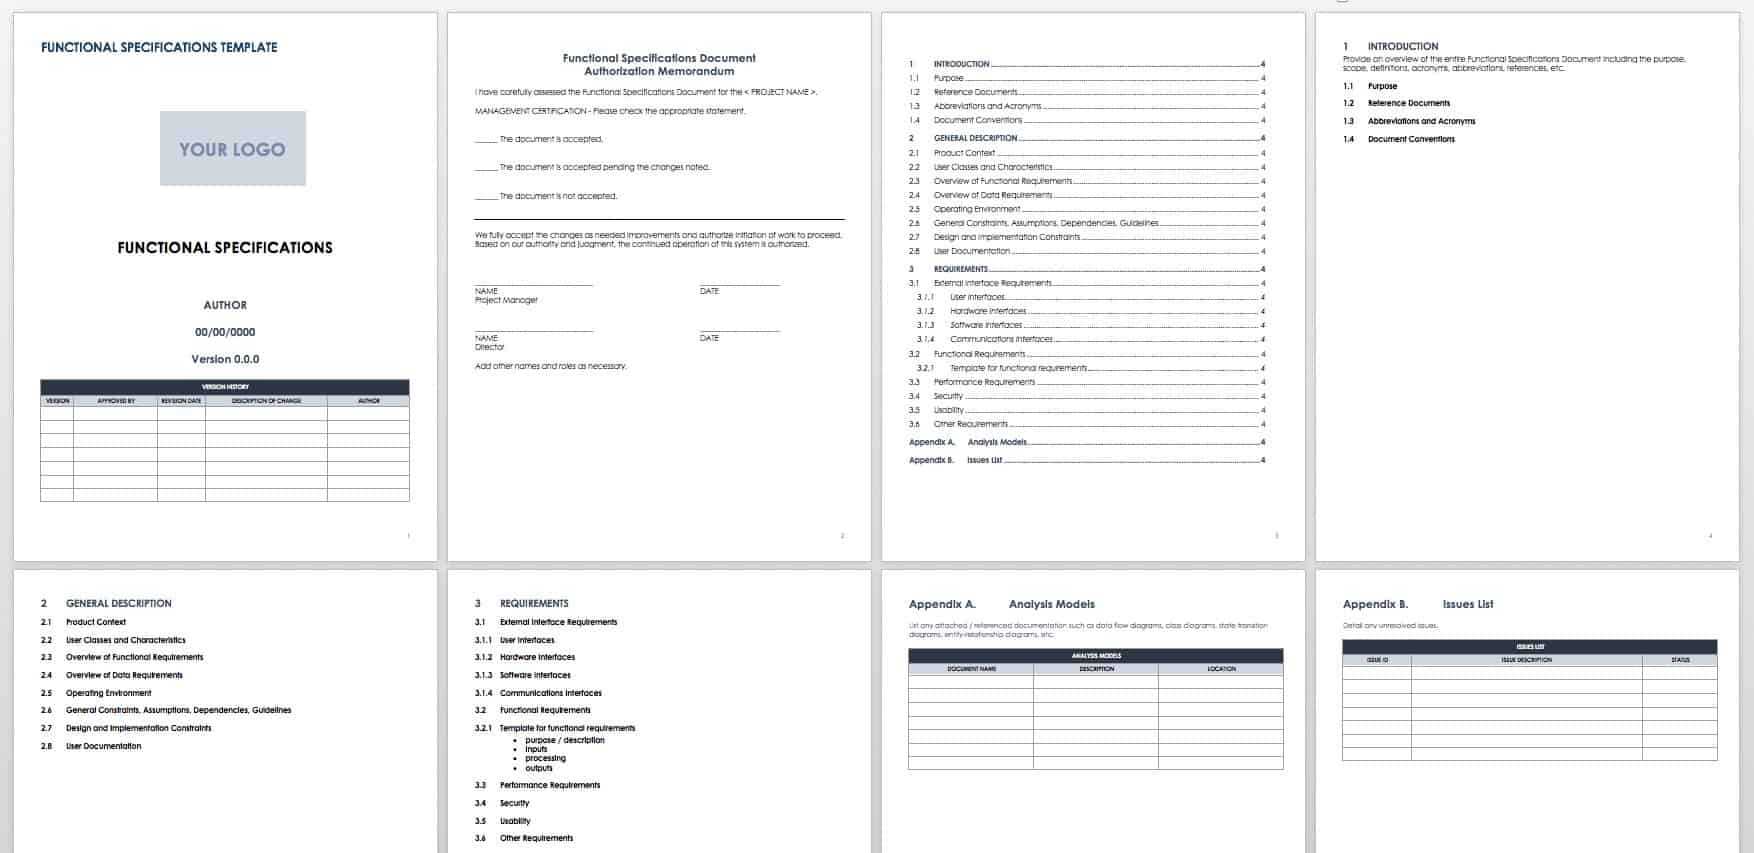 Free Functional Specification Templates | Smartsheet Regarding Business Rules Template Word